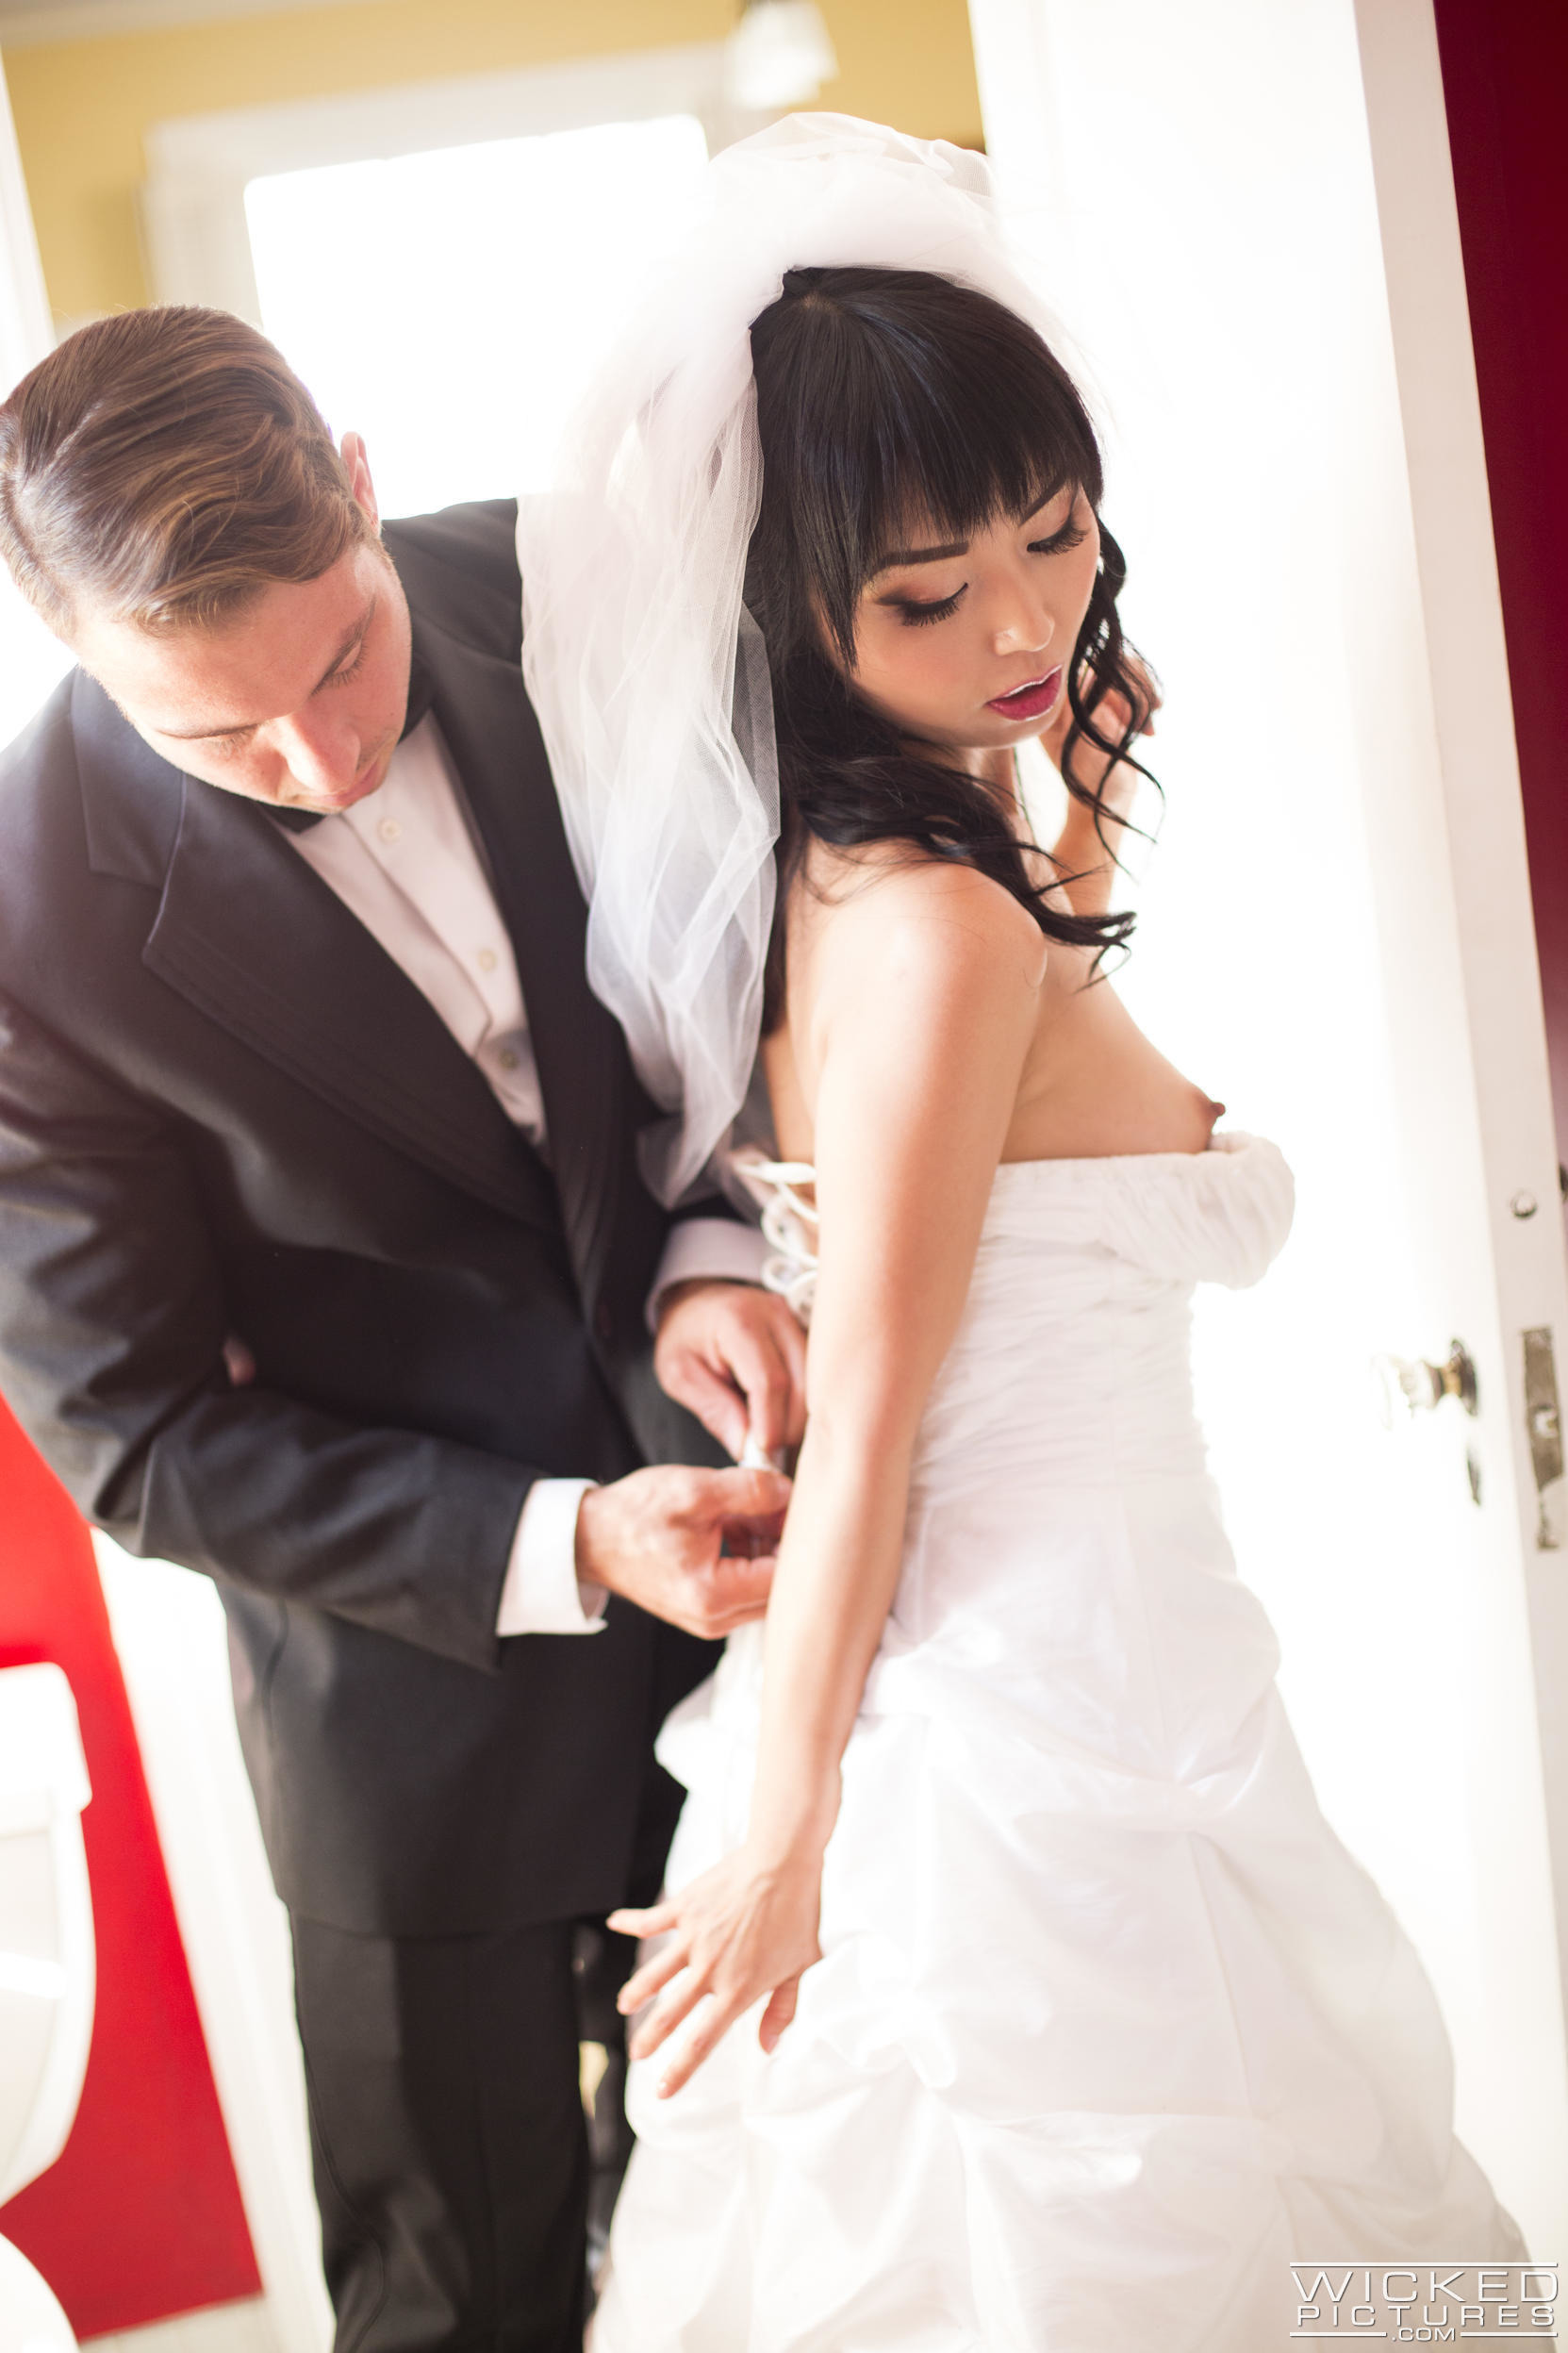 Shaved Asian Bride Marica Hase Wearing Wedding Ring Giving Blowjob Tgp Gallery 281874